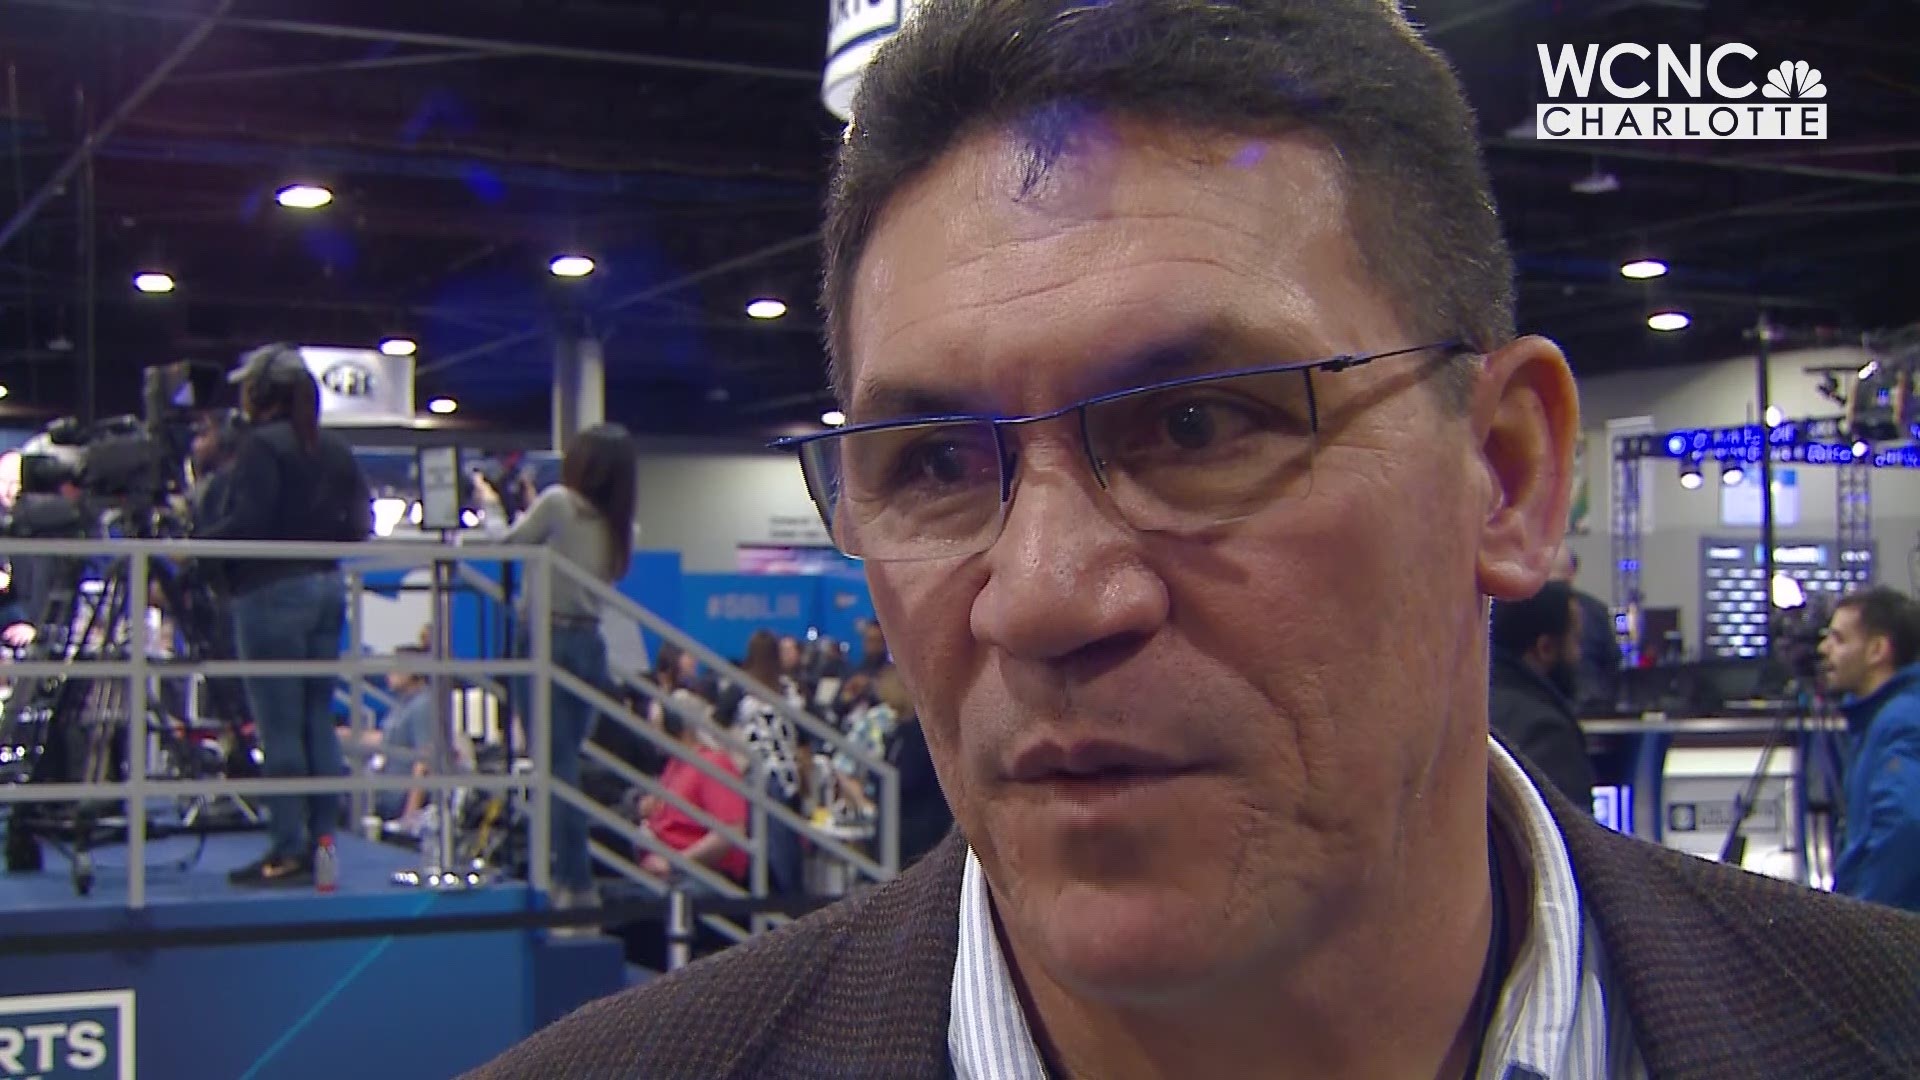 Carolina Panthers head coach Ron Rivera reflects on the illustrious career of Julius Peppers, who announced his retirement after 17 seasons in the NFL.